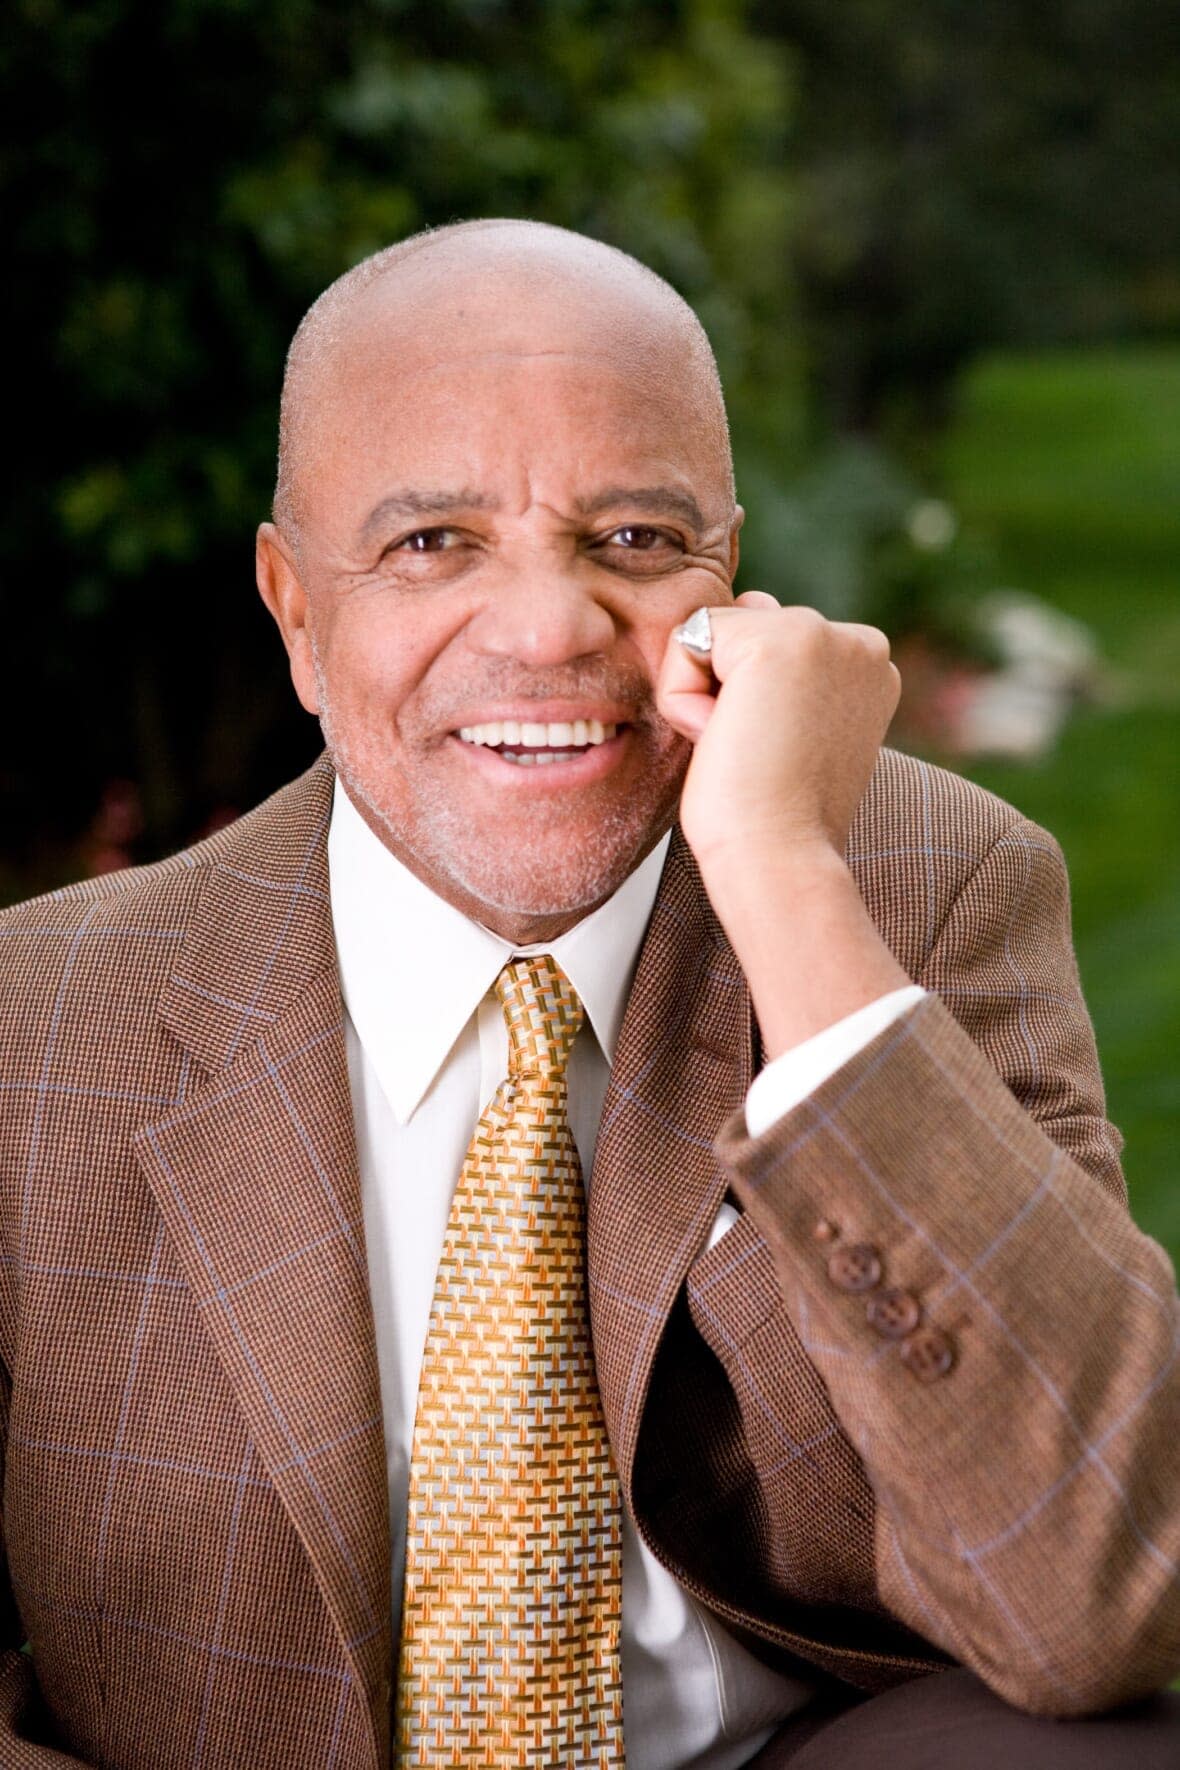 Berry Gordy is slated to receive the Icon Award from the Critics Choice Association during a ceremony on Dec. 5. (Photo courtesy of Critics Choice Association.)